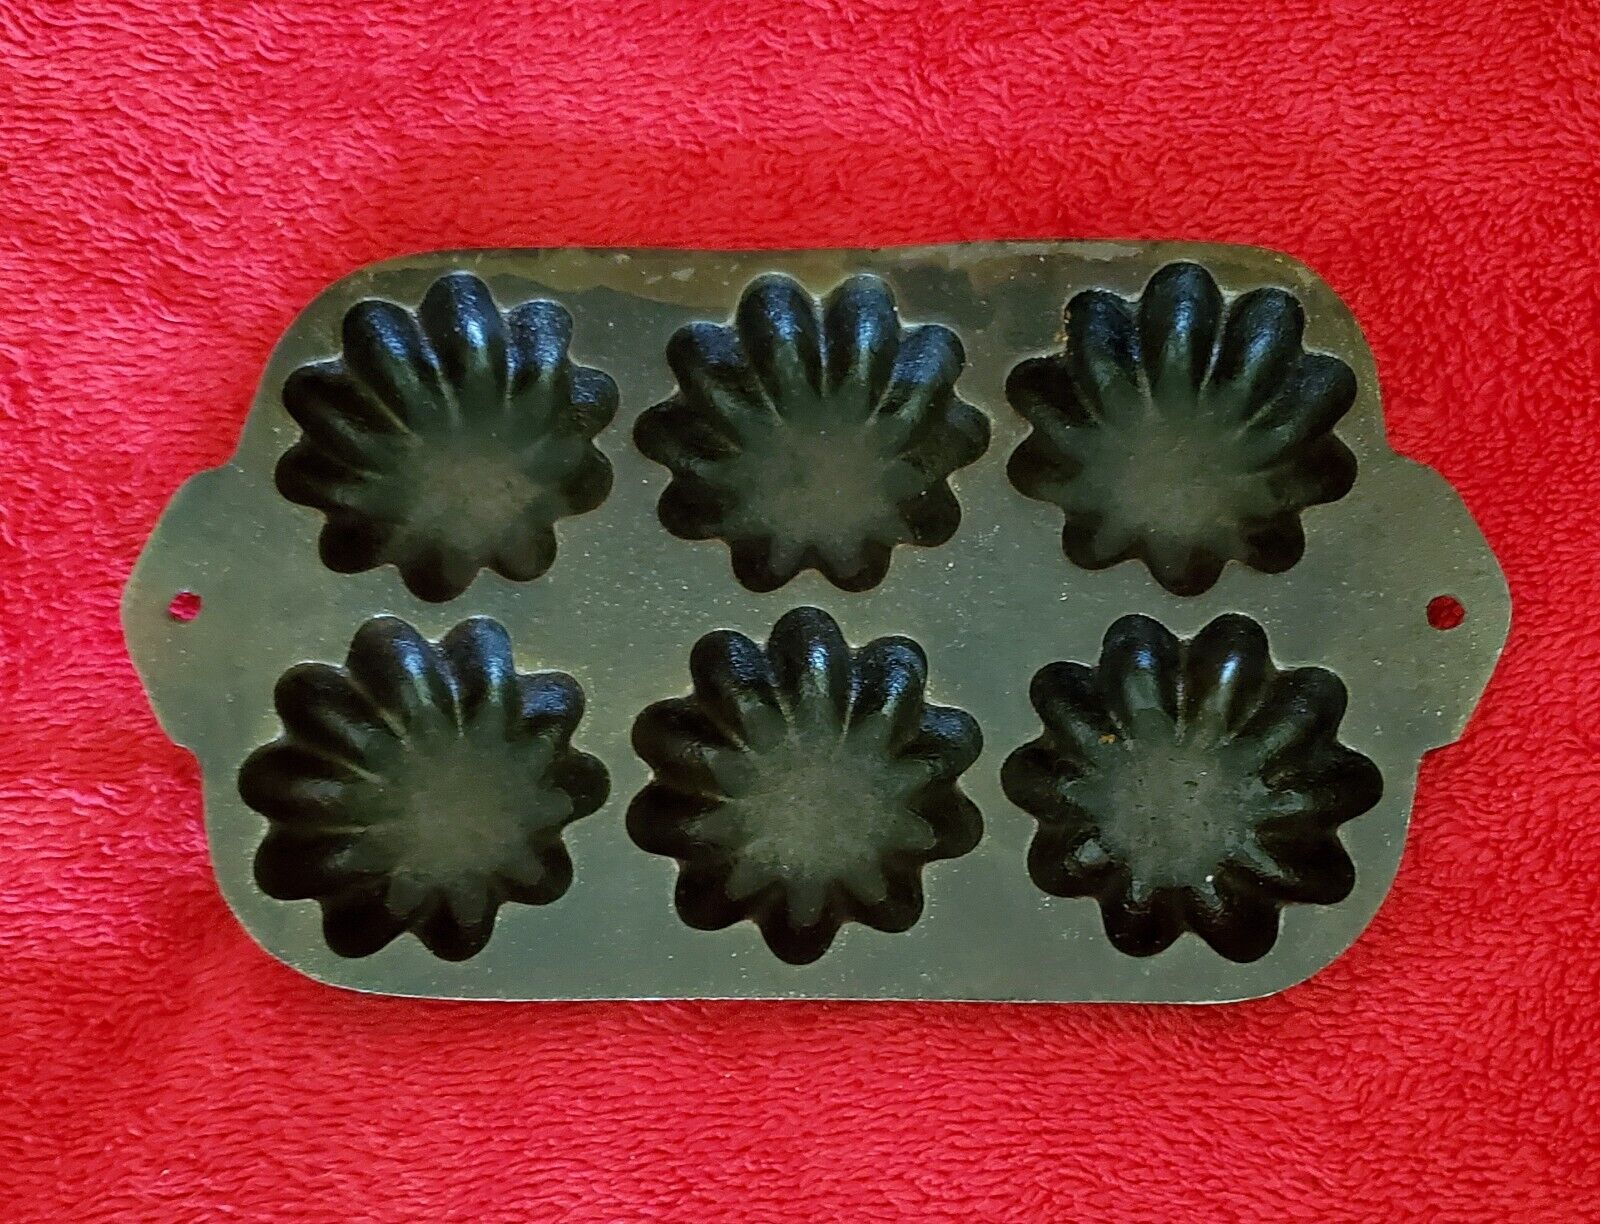 Vintage Cast Iron, Turks Head Muffin Pan, 6 Slot - Original Owners Marked G 2